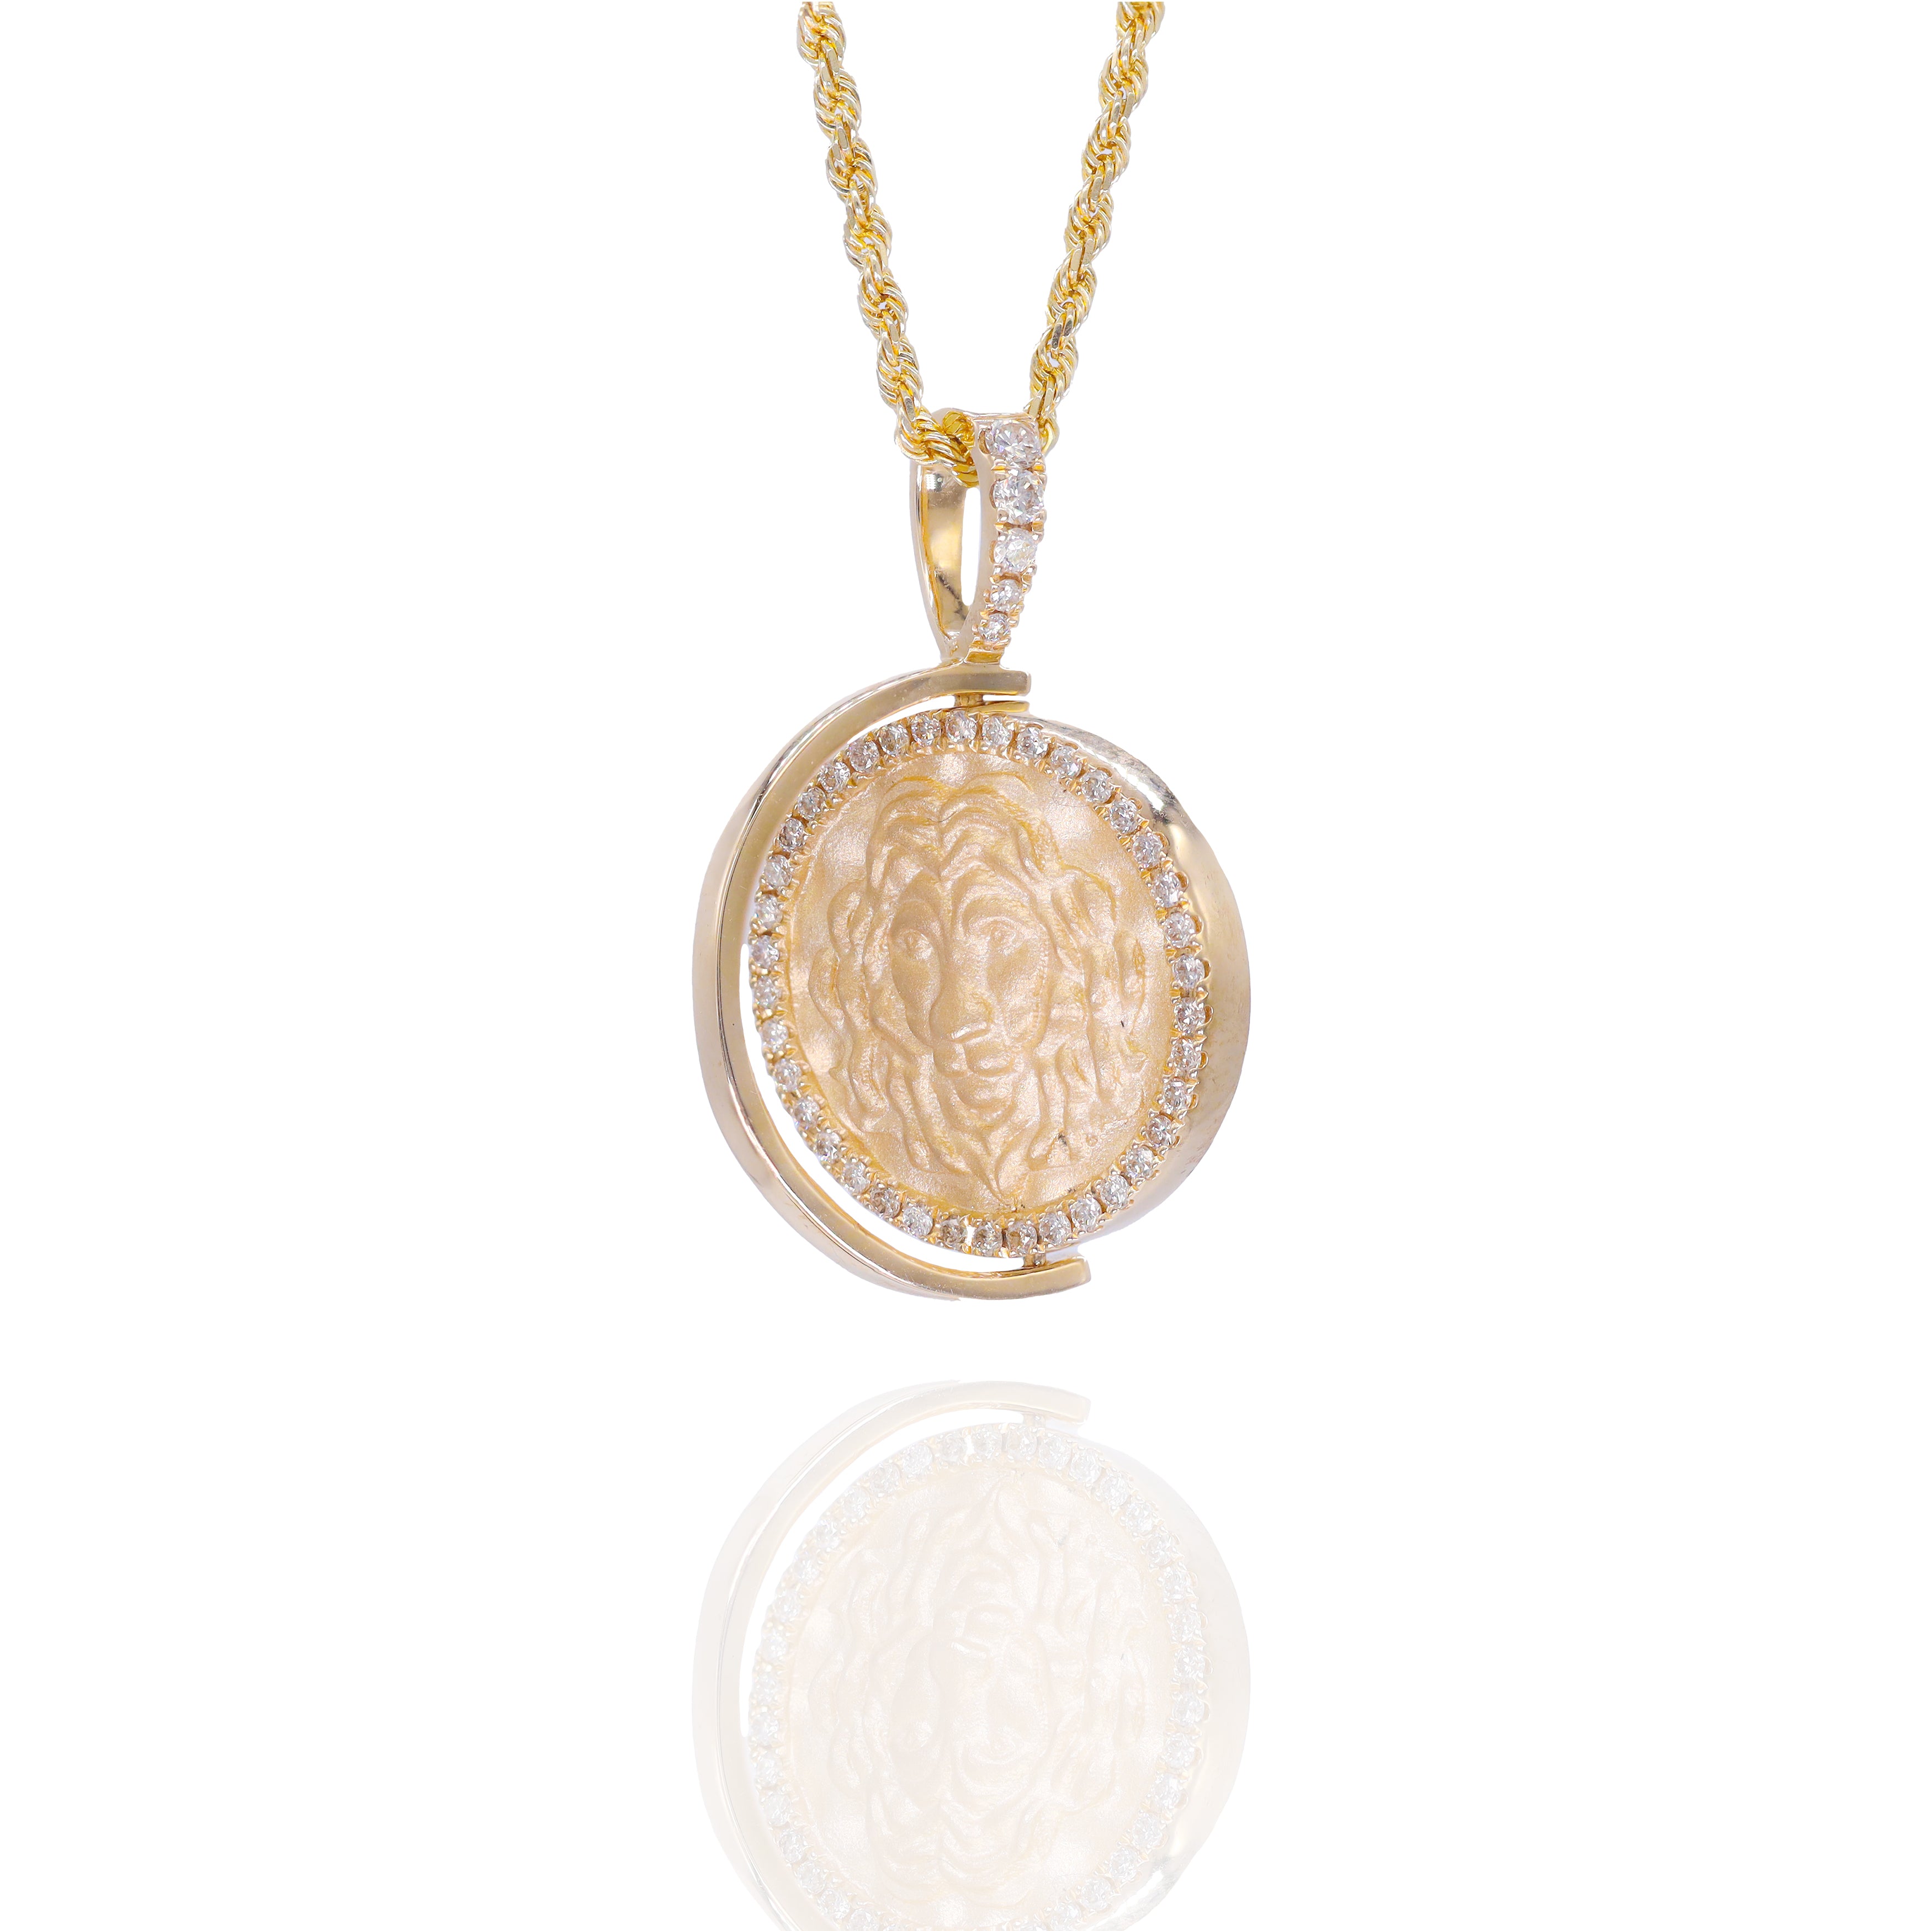 Double Sided Leo Zodiac Sign Medallion Diamond Pendant w/ Mother of Pearl